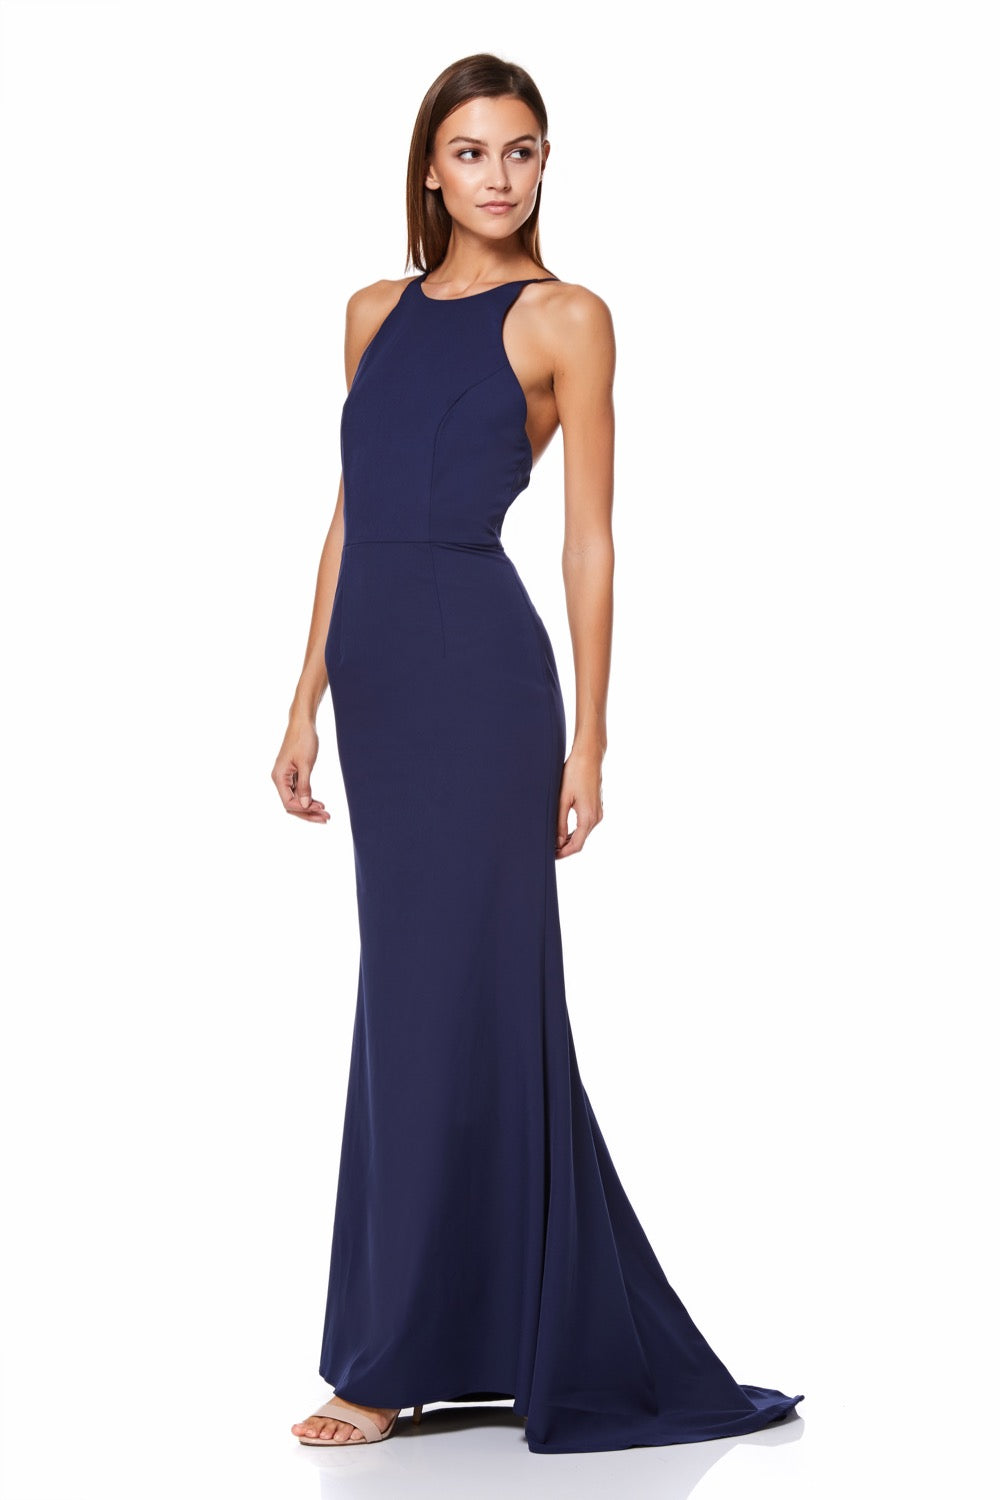 Lyssa High Neck Fishtail Maxi Dress with Strappy Back Detail